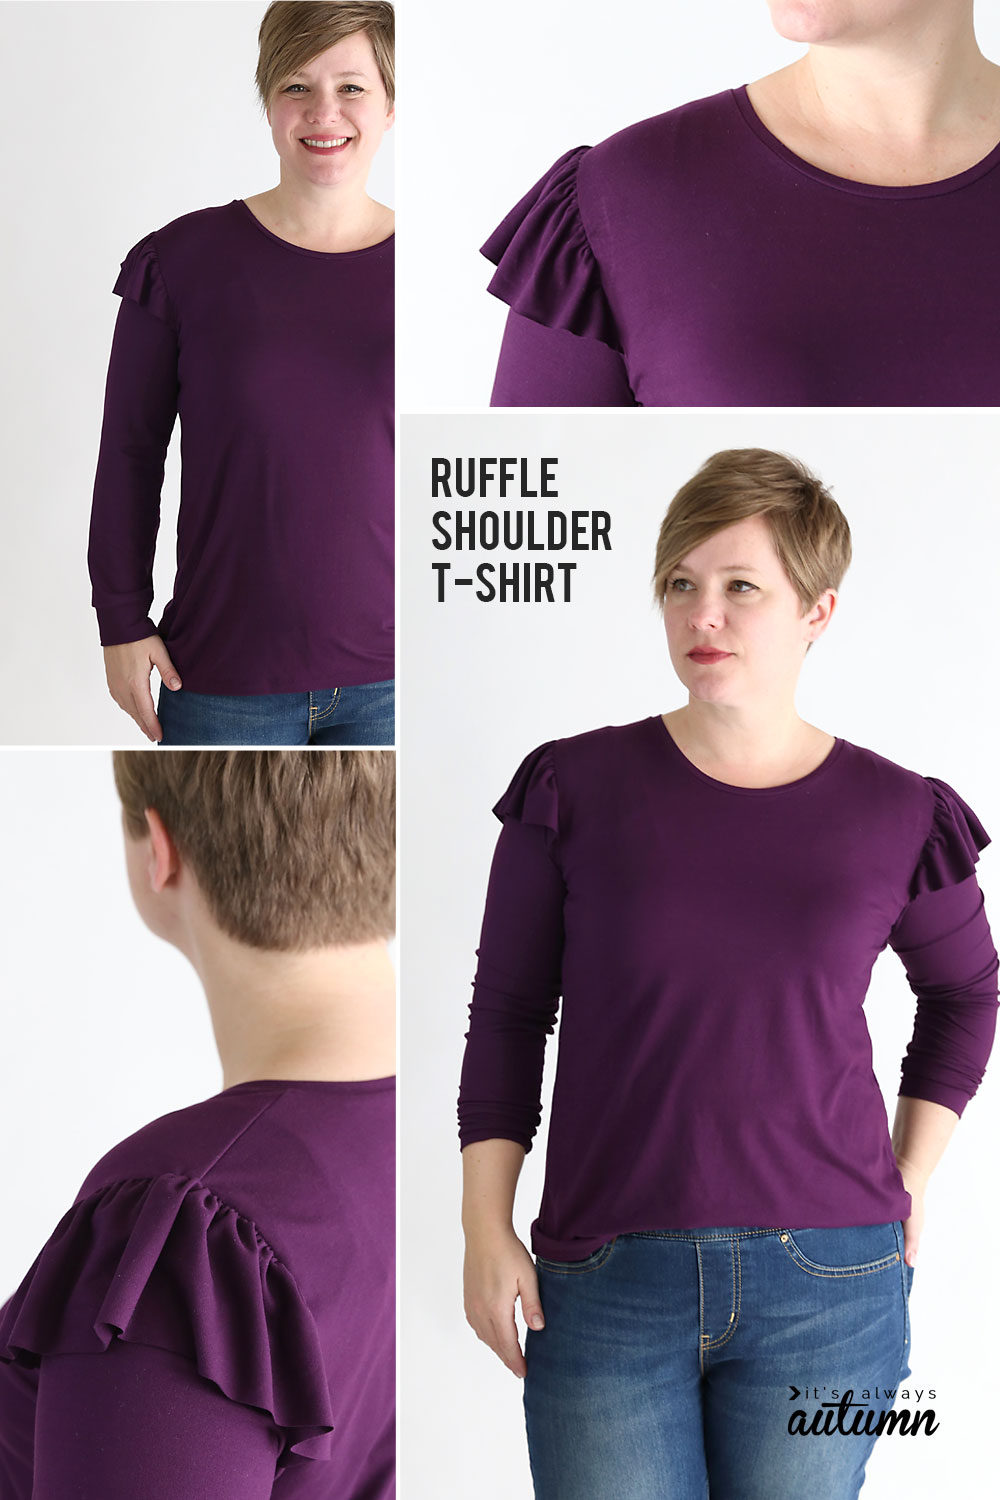 A woman wearing a purple long sleeve t-shirt with ruffles at the shoulders